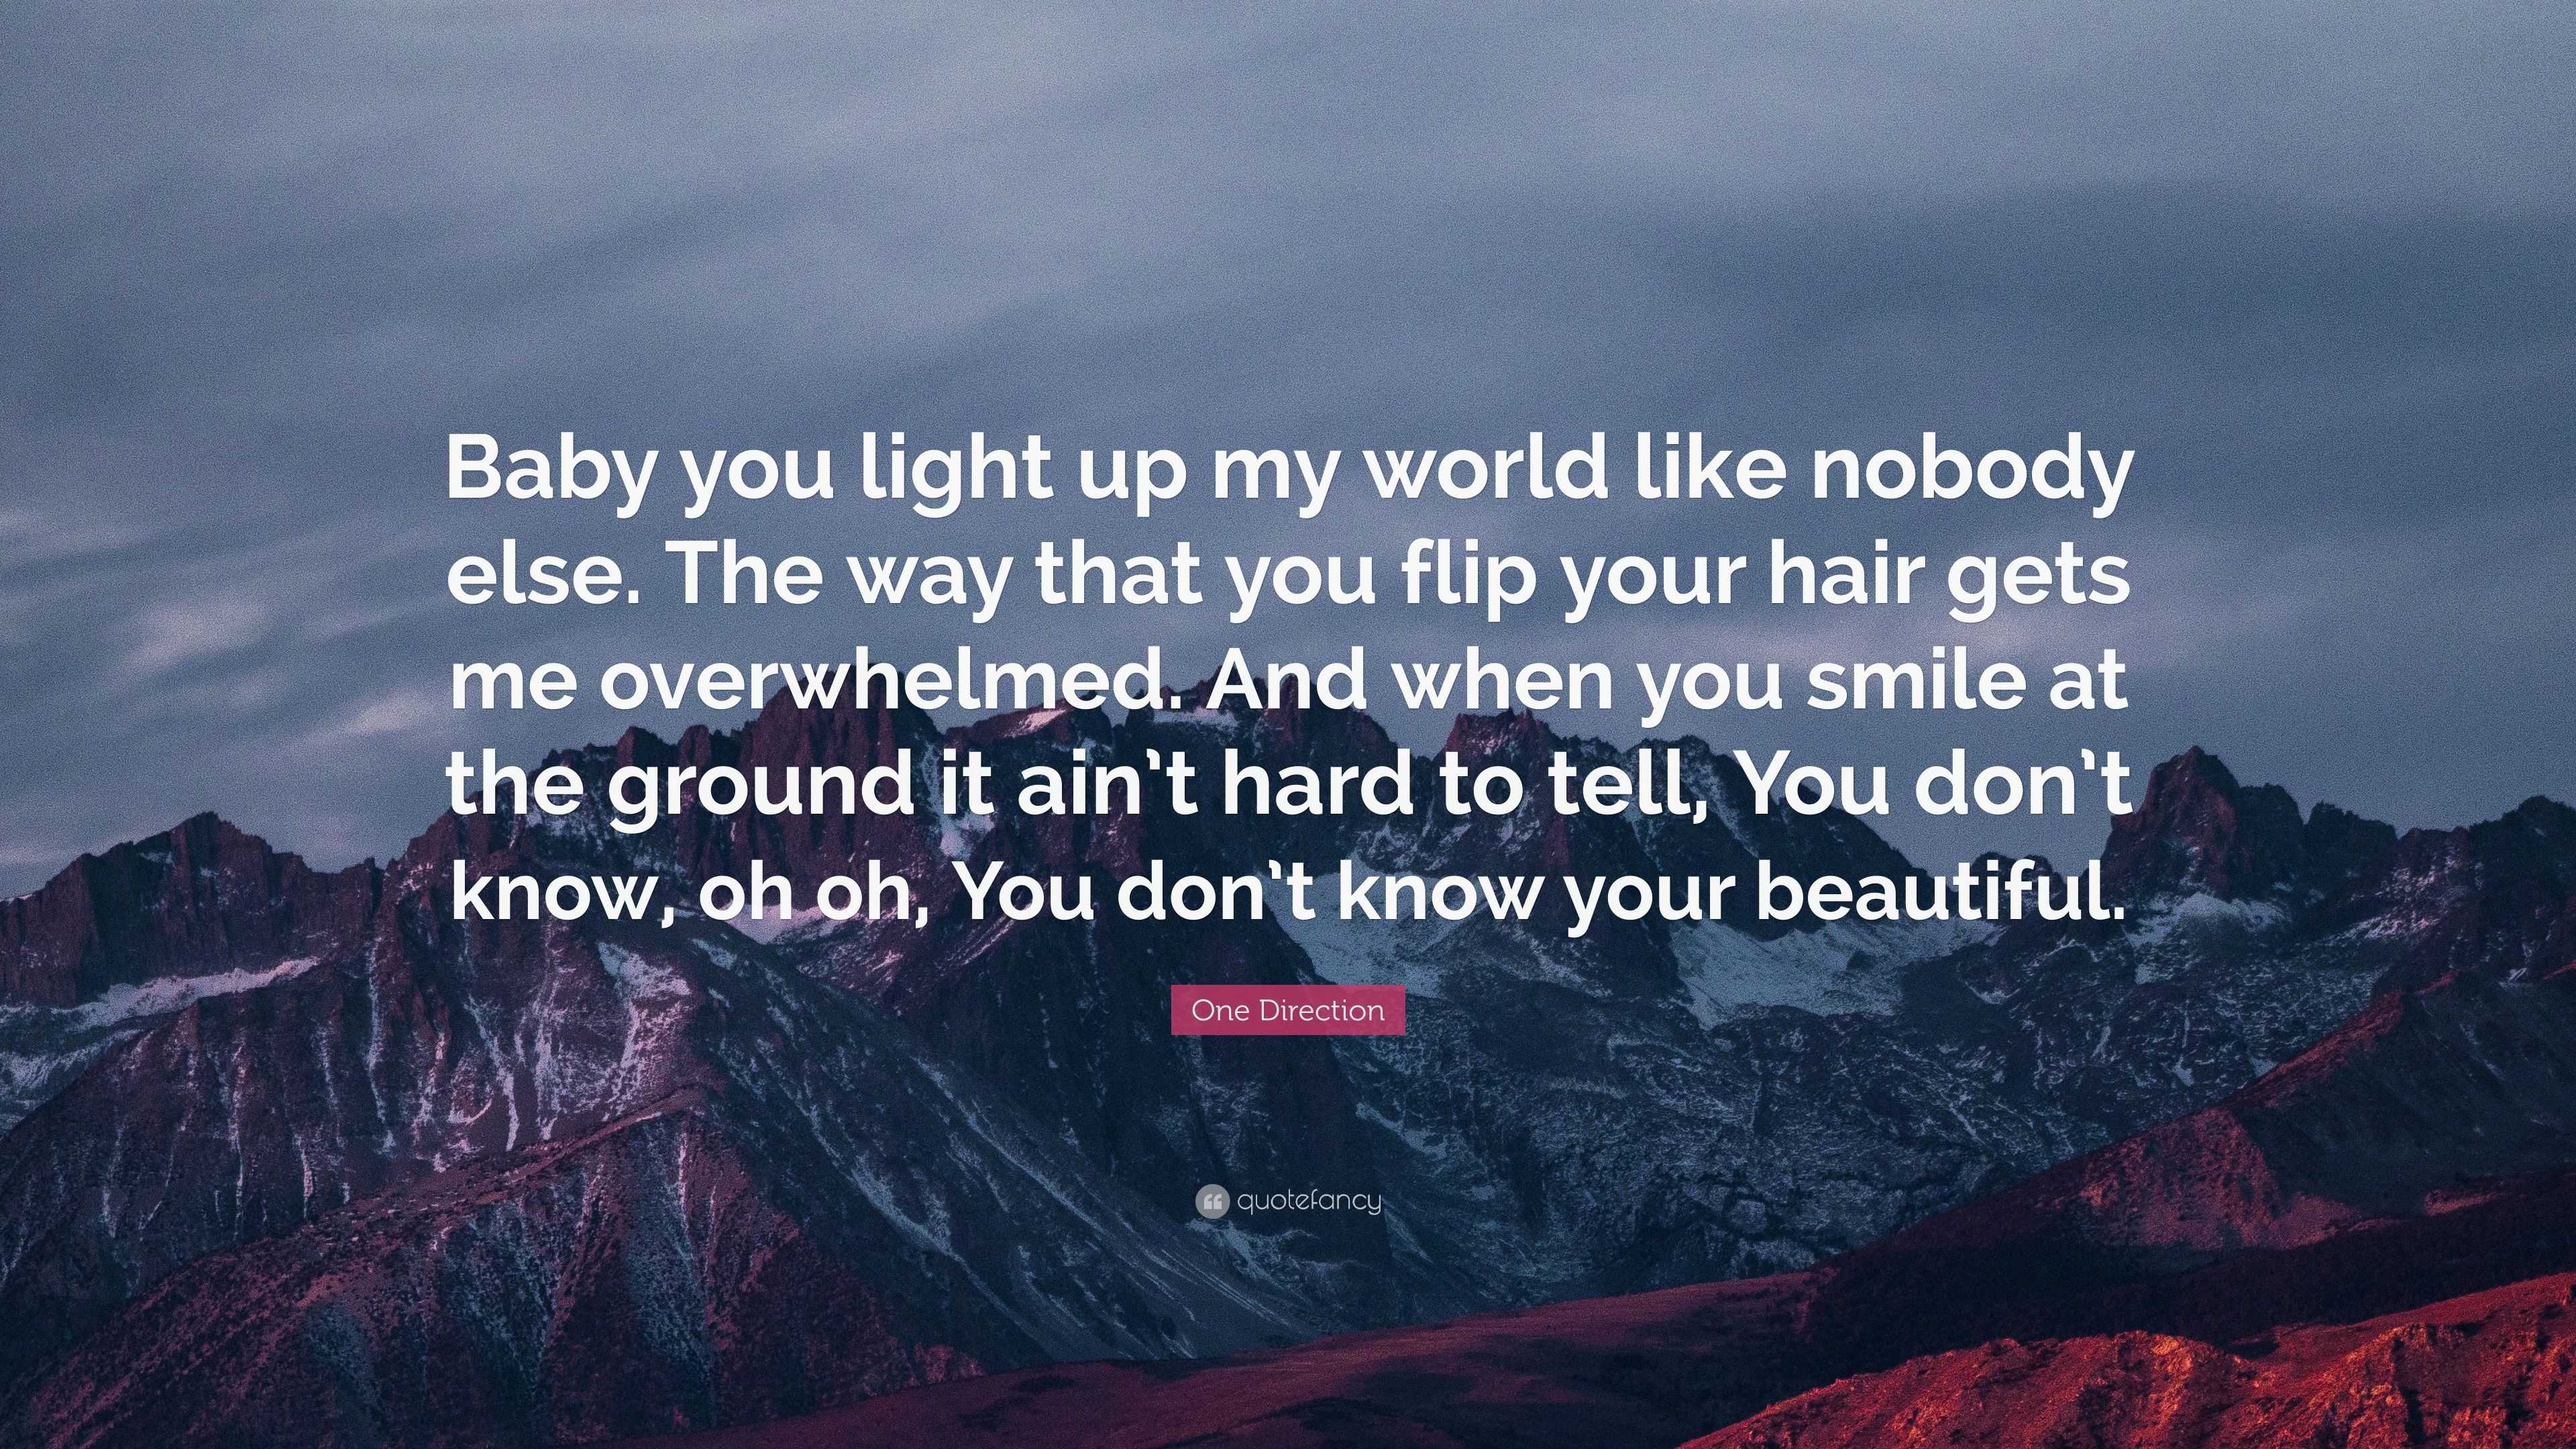 One Direction Quote: “Baby you light up my world like nobody else. The ...